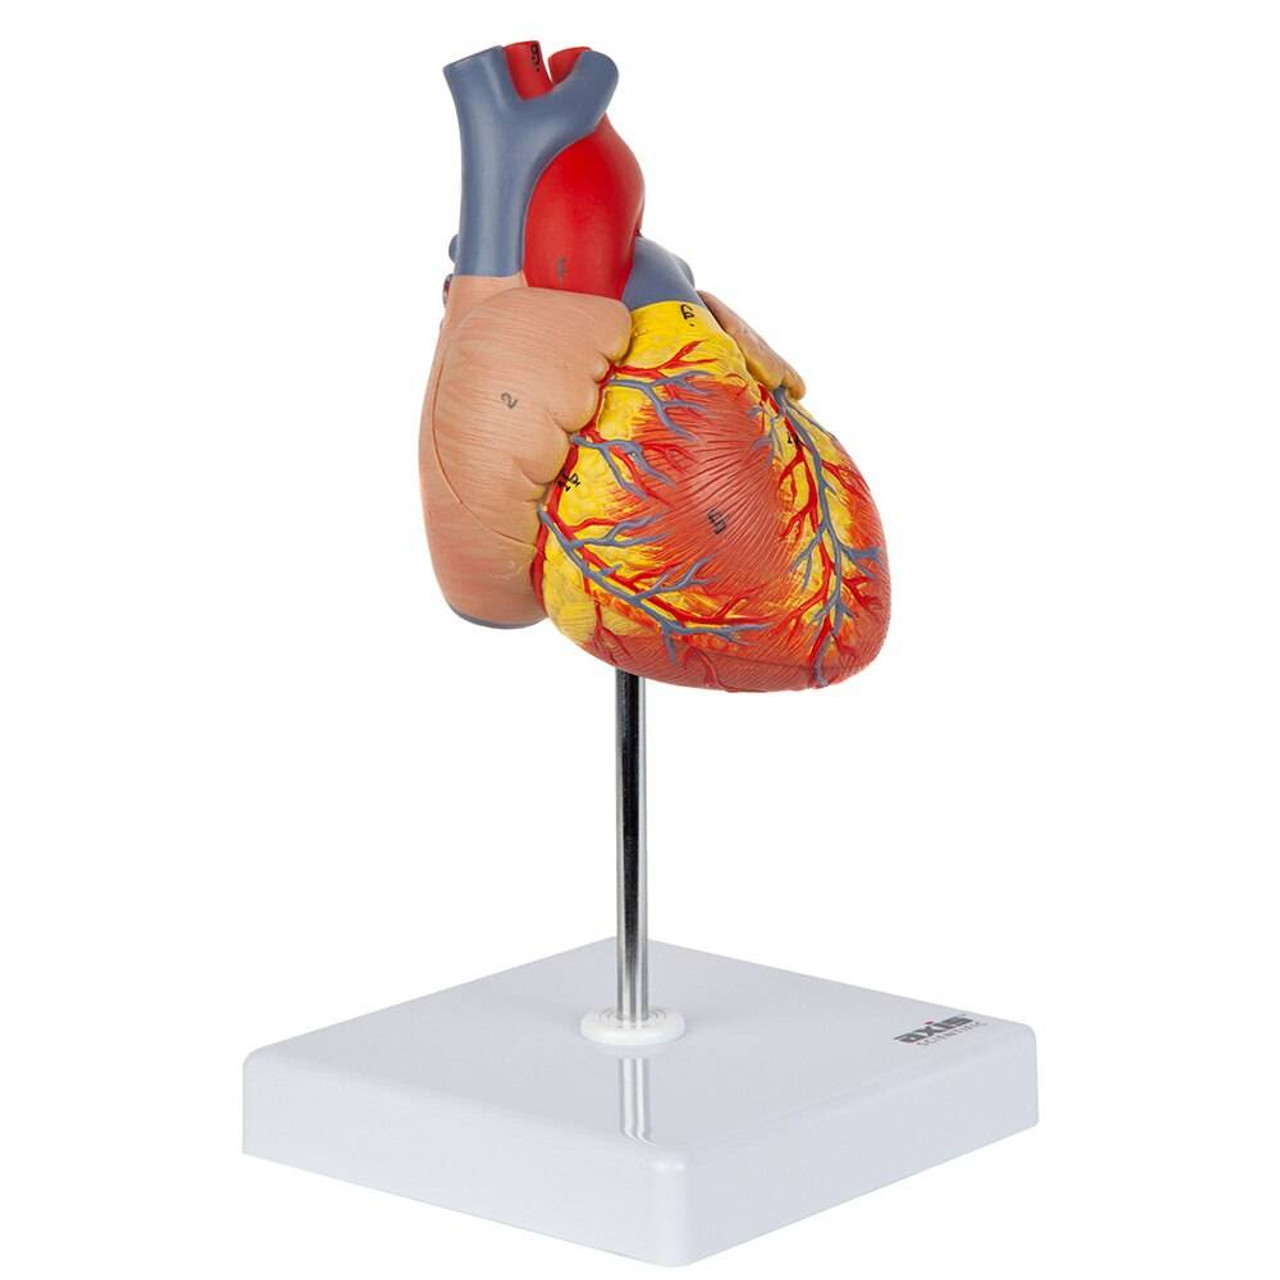 Axis Scientific 2-Part Deluxe Life-Size Human Heart Anatomy Model